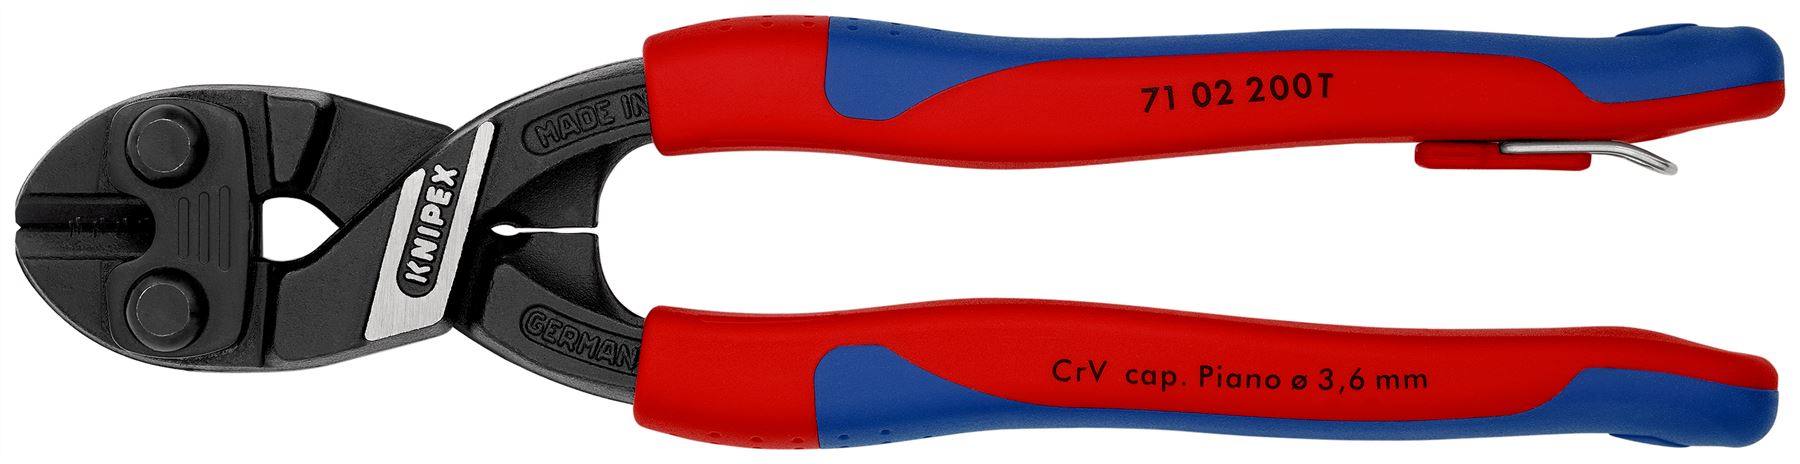 Knipex CoBolt Compact Bolt Cutters Cutting Pliers 200mm Multi Component Grips with Tether Point 71 02 200 T